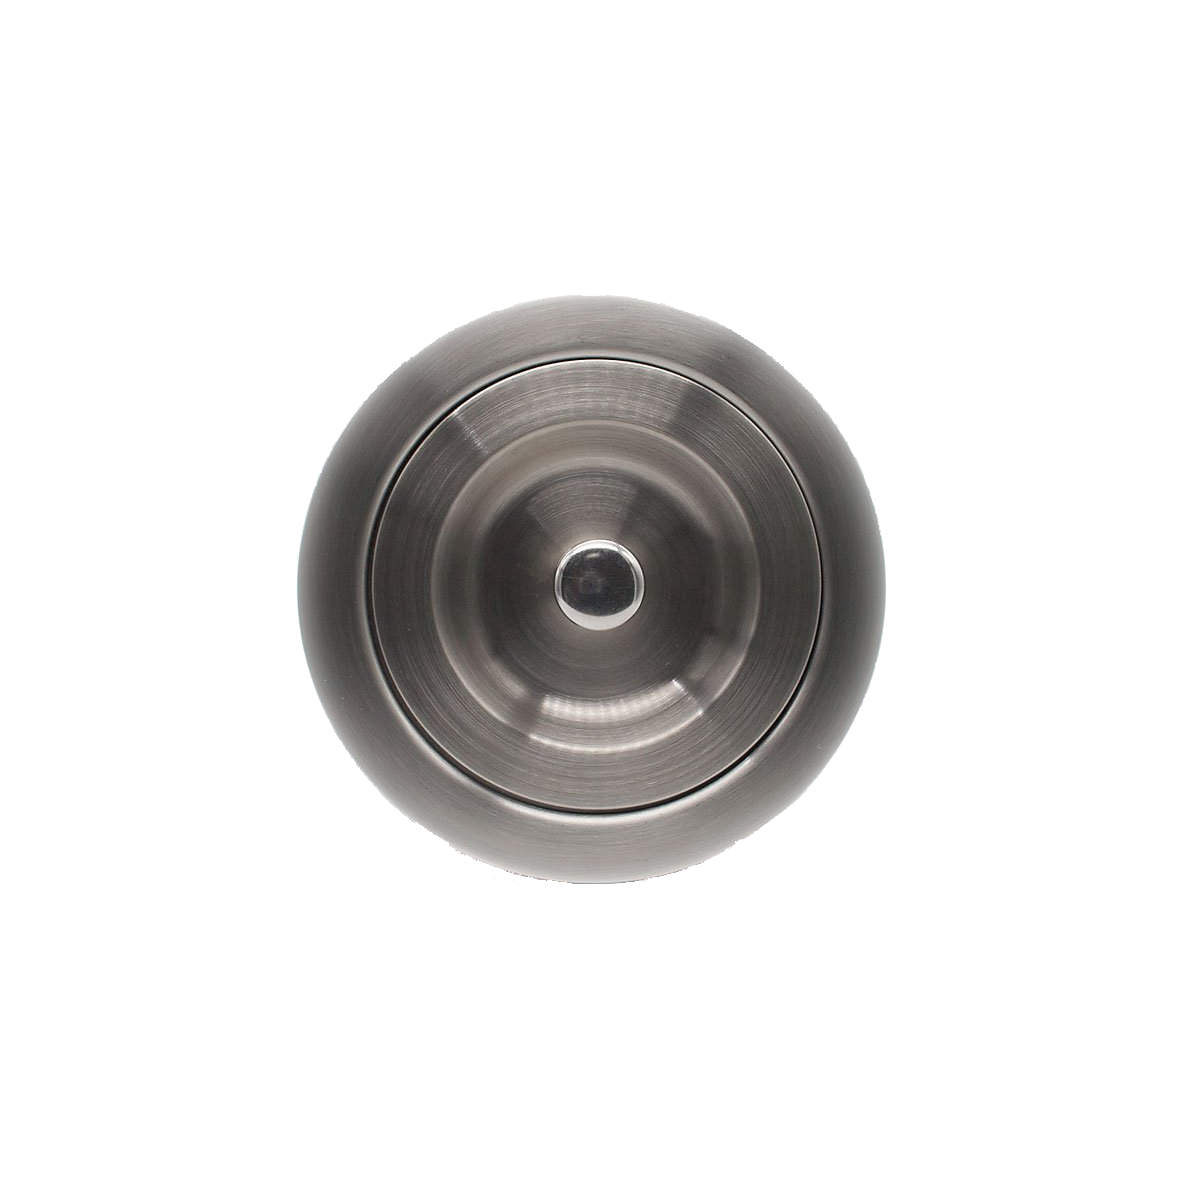 Pelican Int'l Stainless Deluxe Strainer